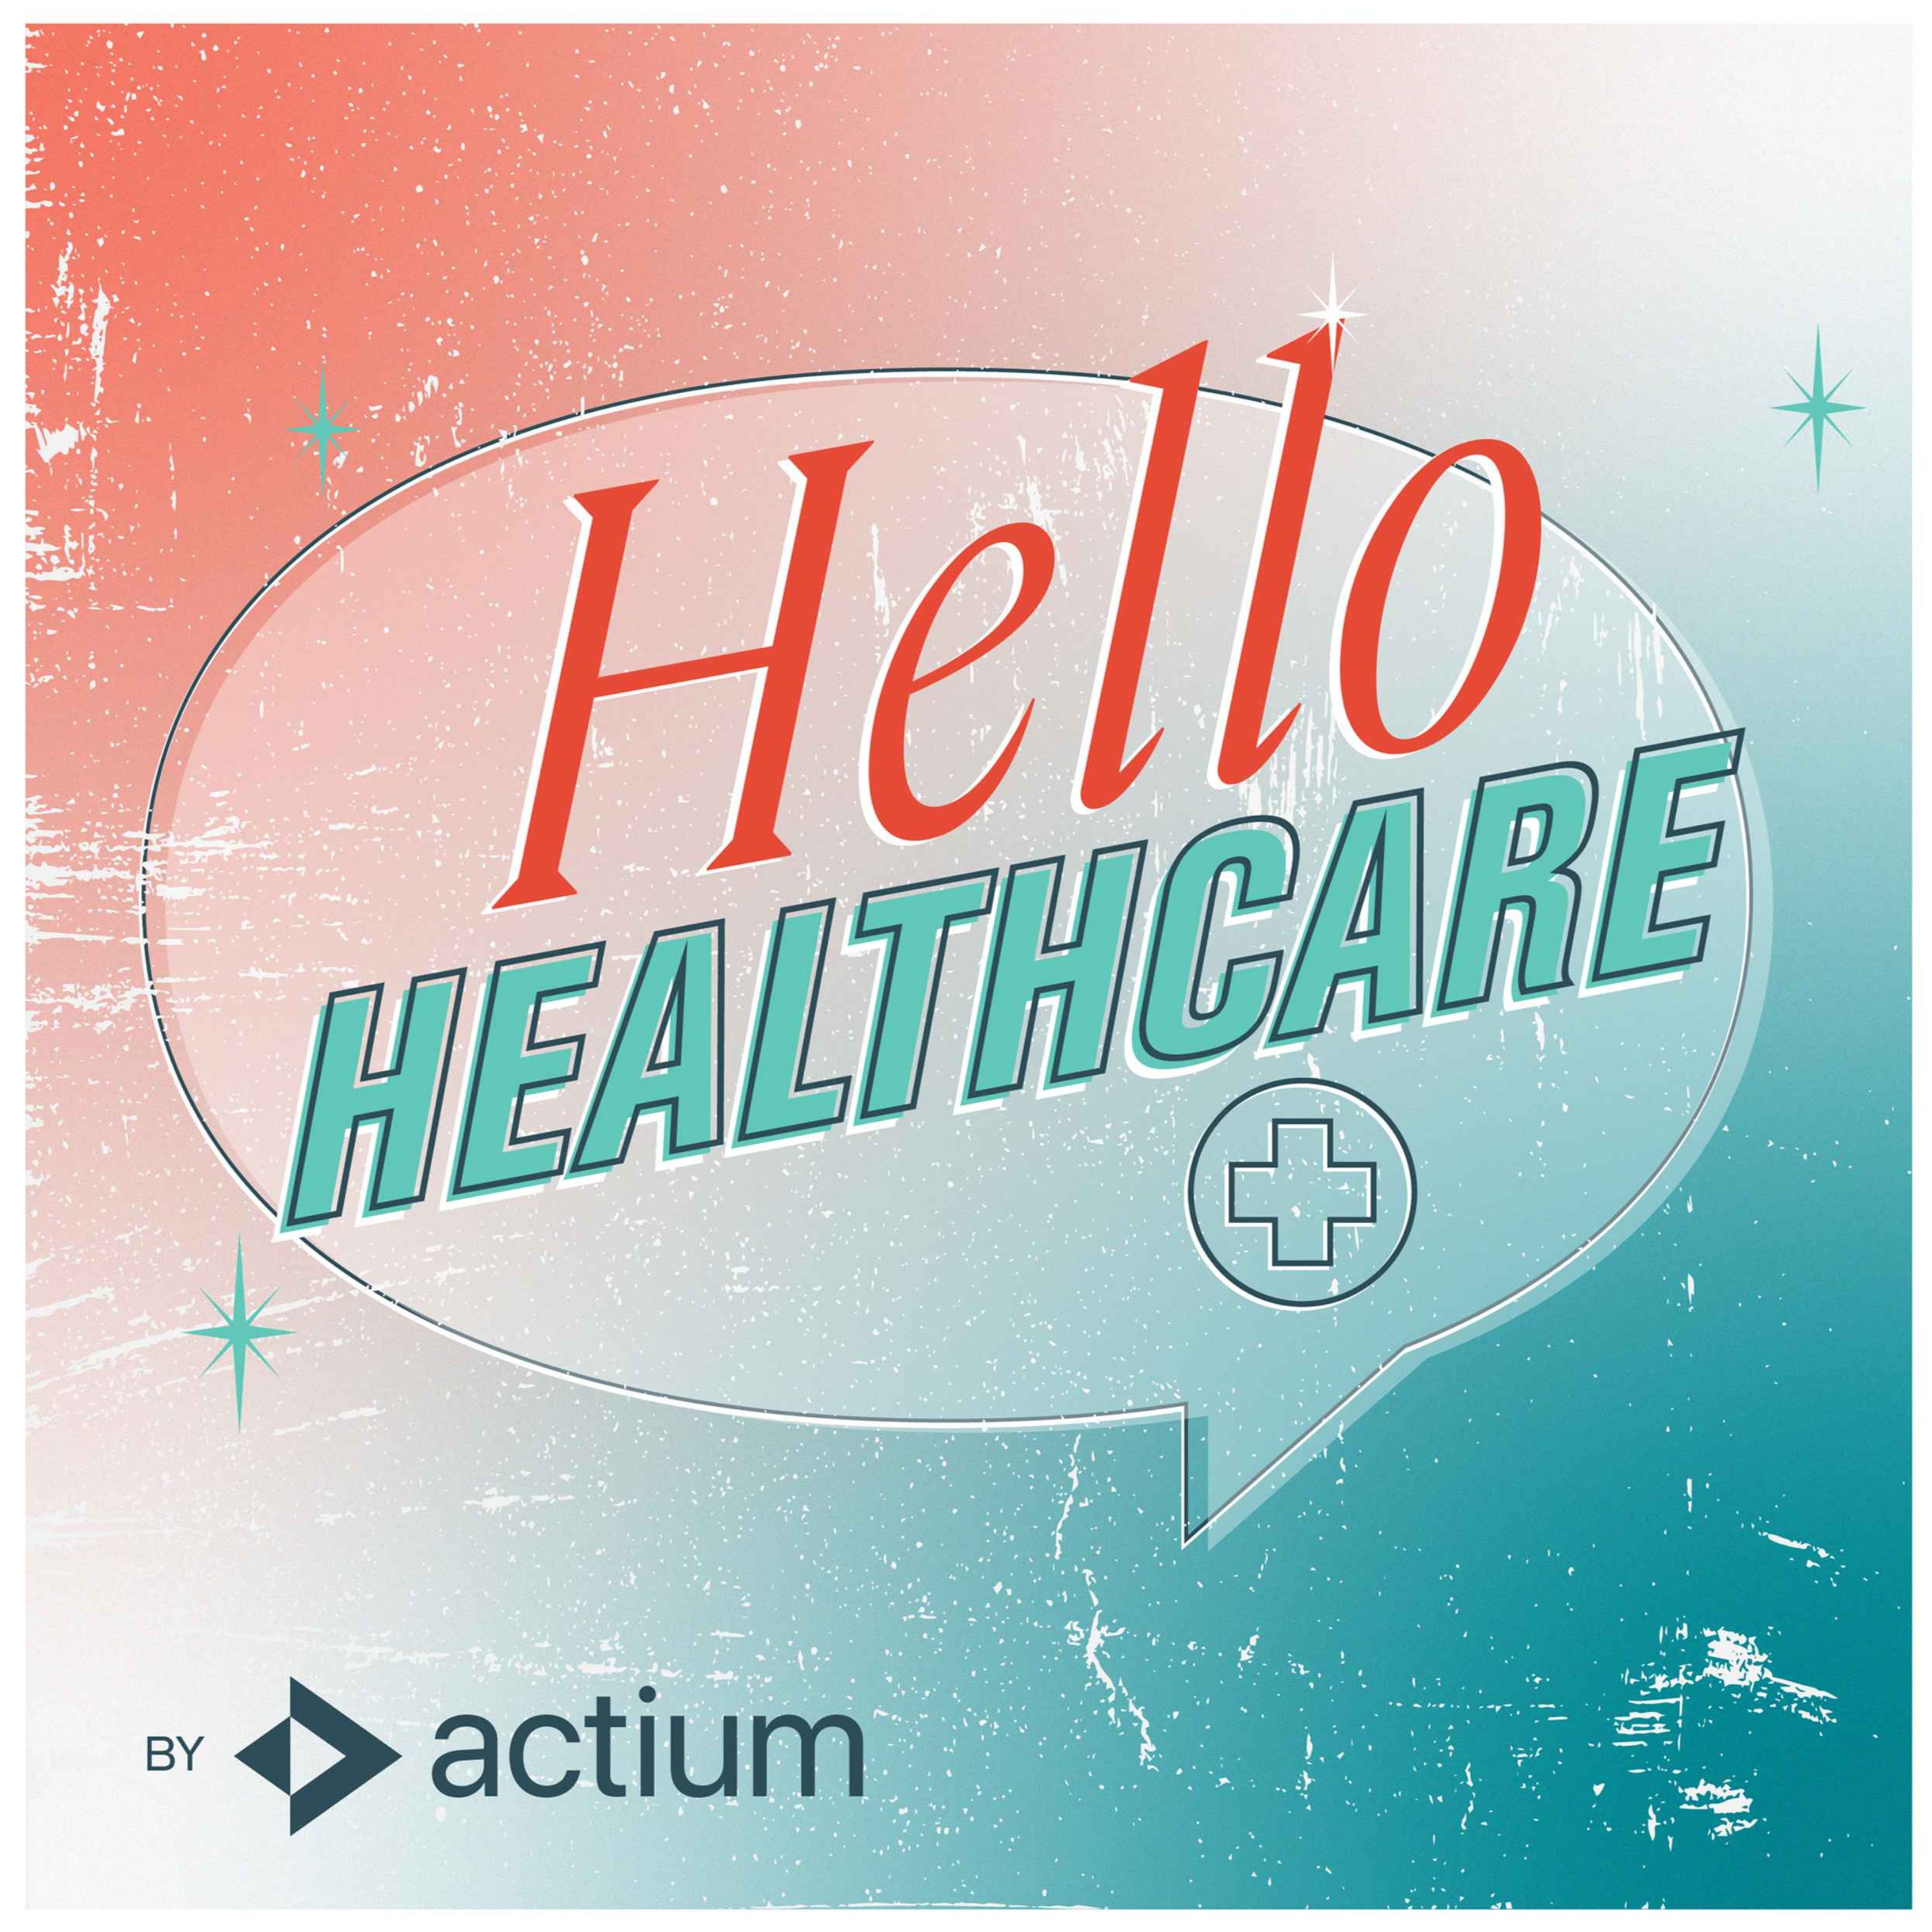 Healthcare Economics 101 – The Rise of Data for Member Engagement, ft. Aaron Novotny